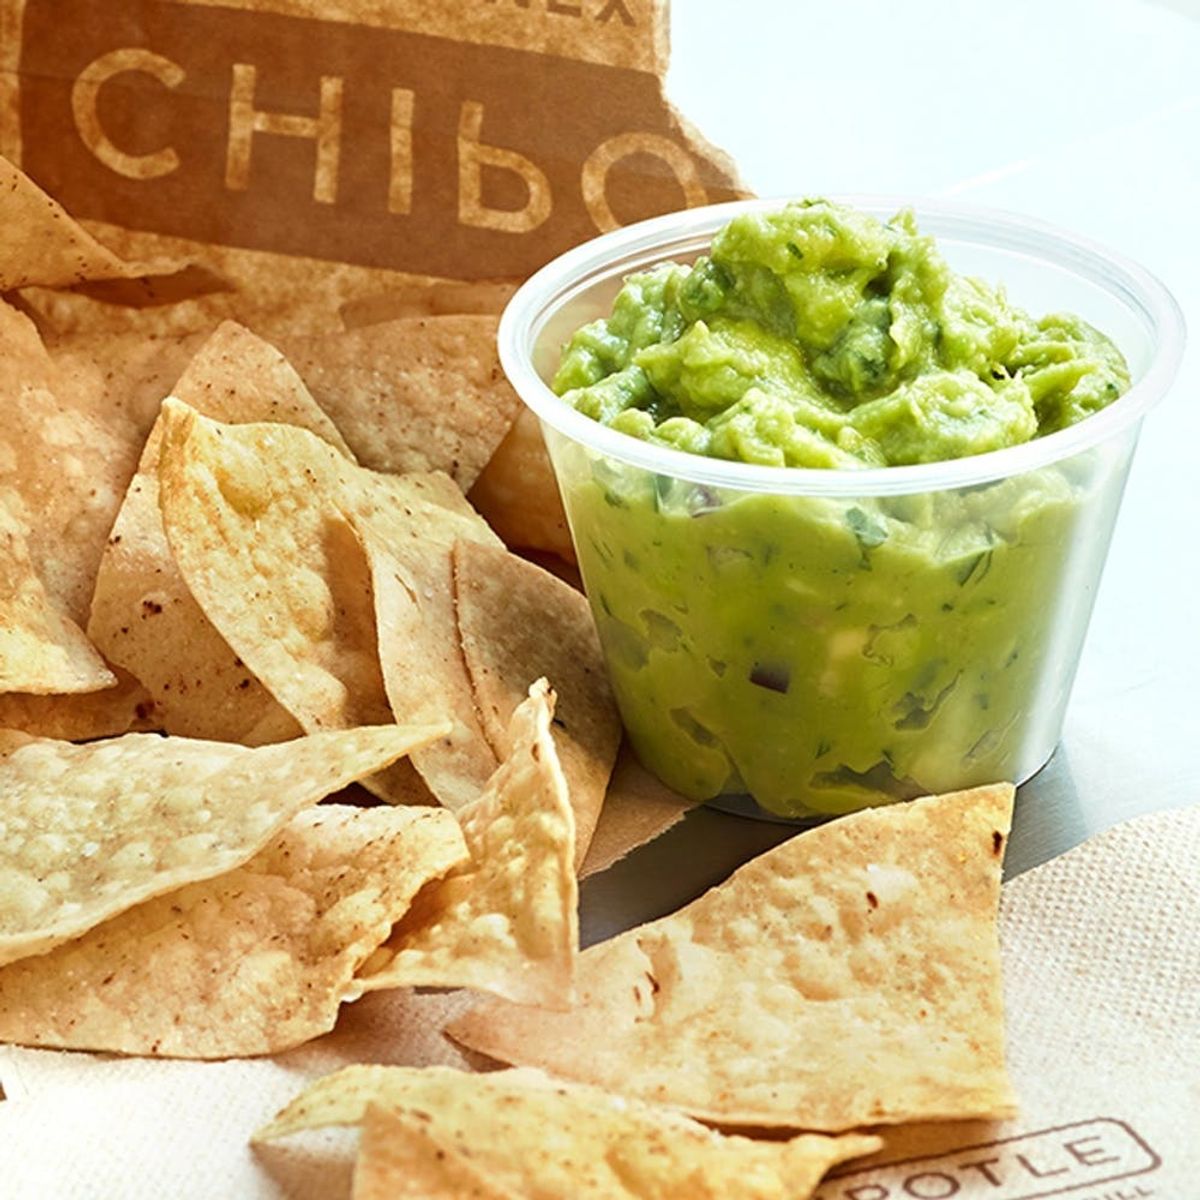 Chipotle Just Revealed Its Biggest Secret: Their Actual Guacamole Recipe!